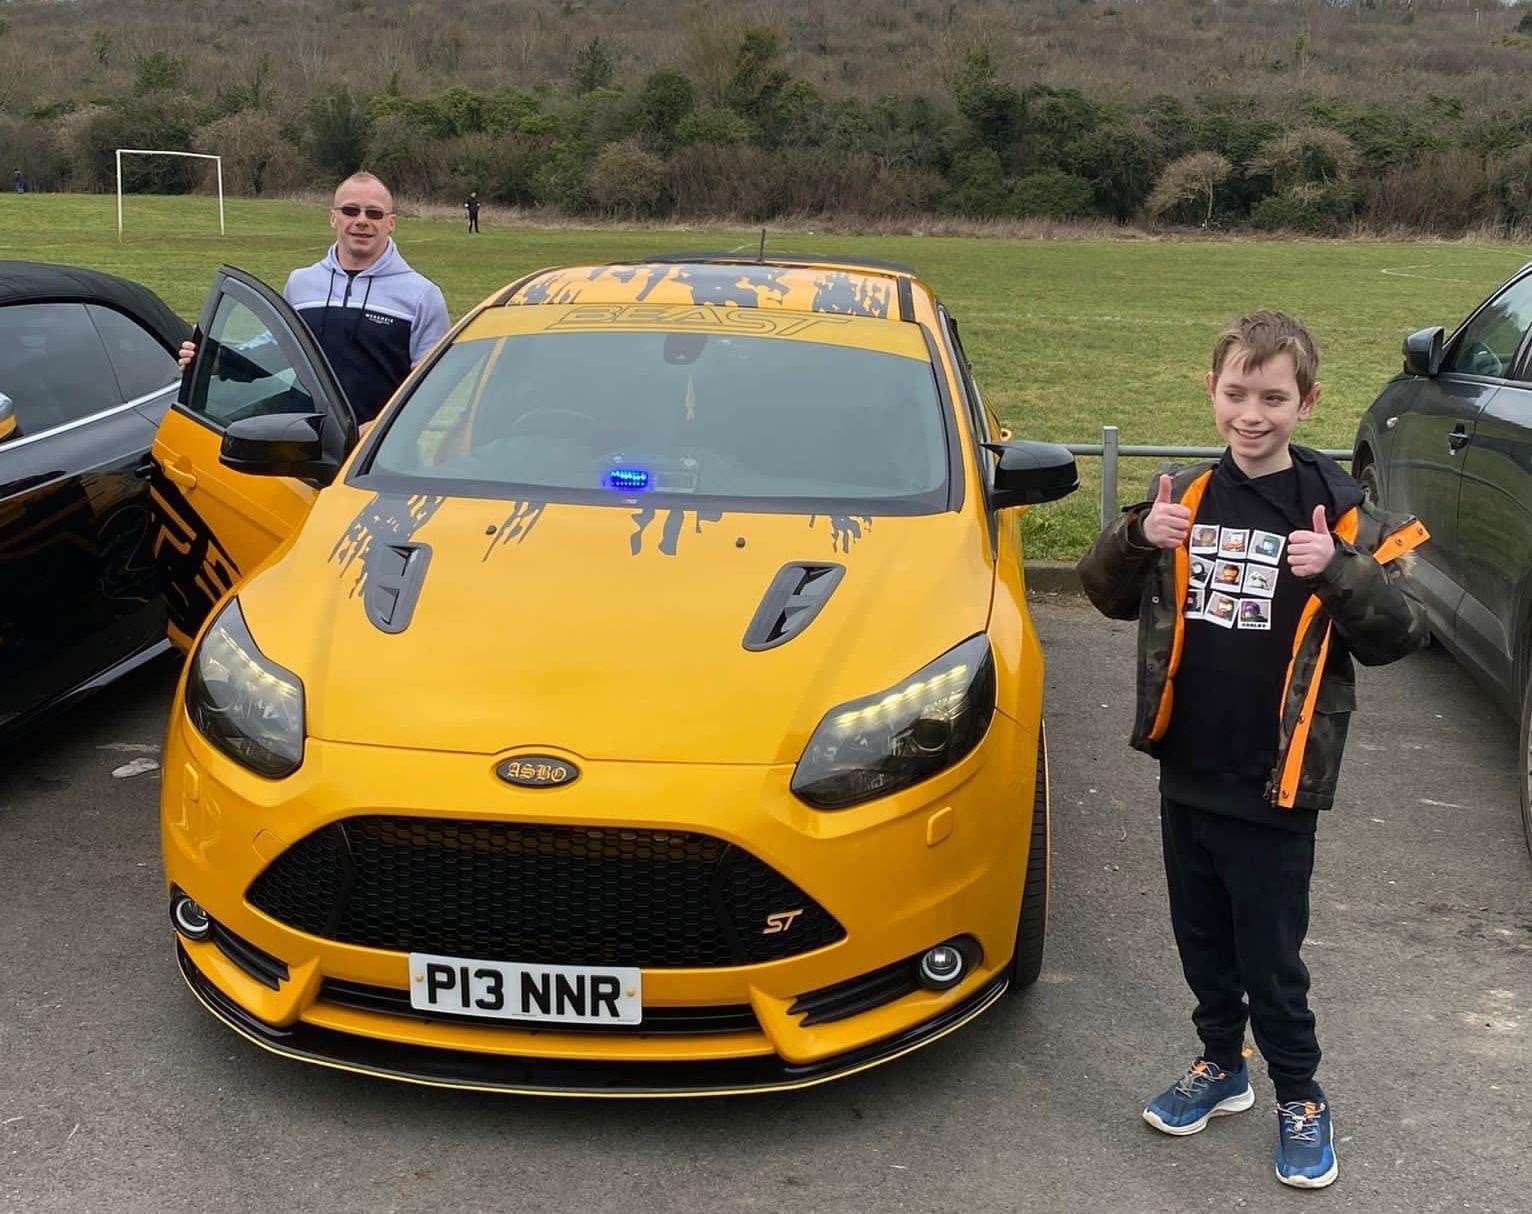 The birthday boy posed with all the cars. Picture: Kerry North